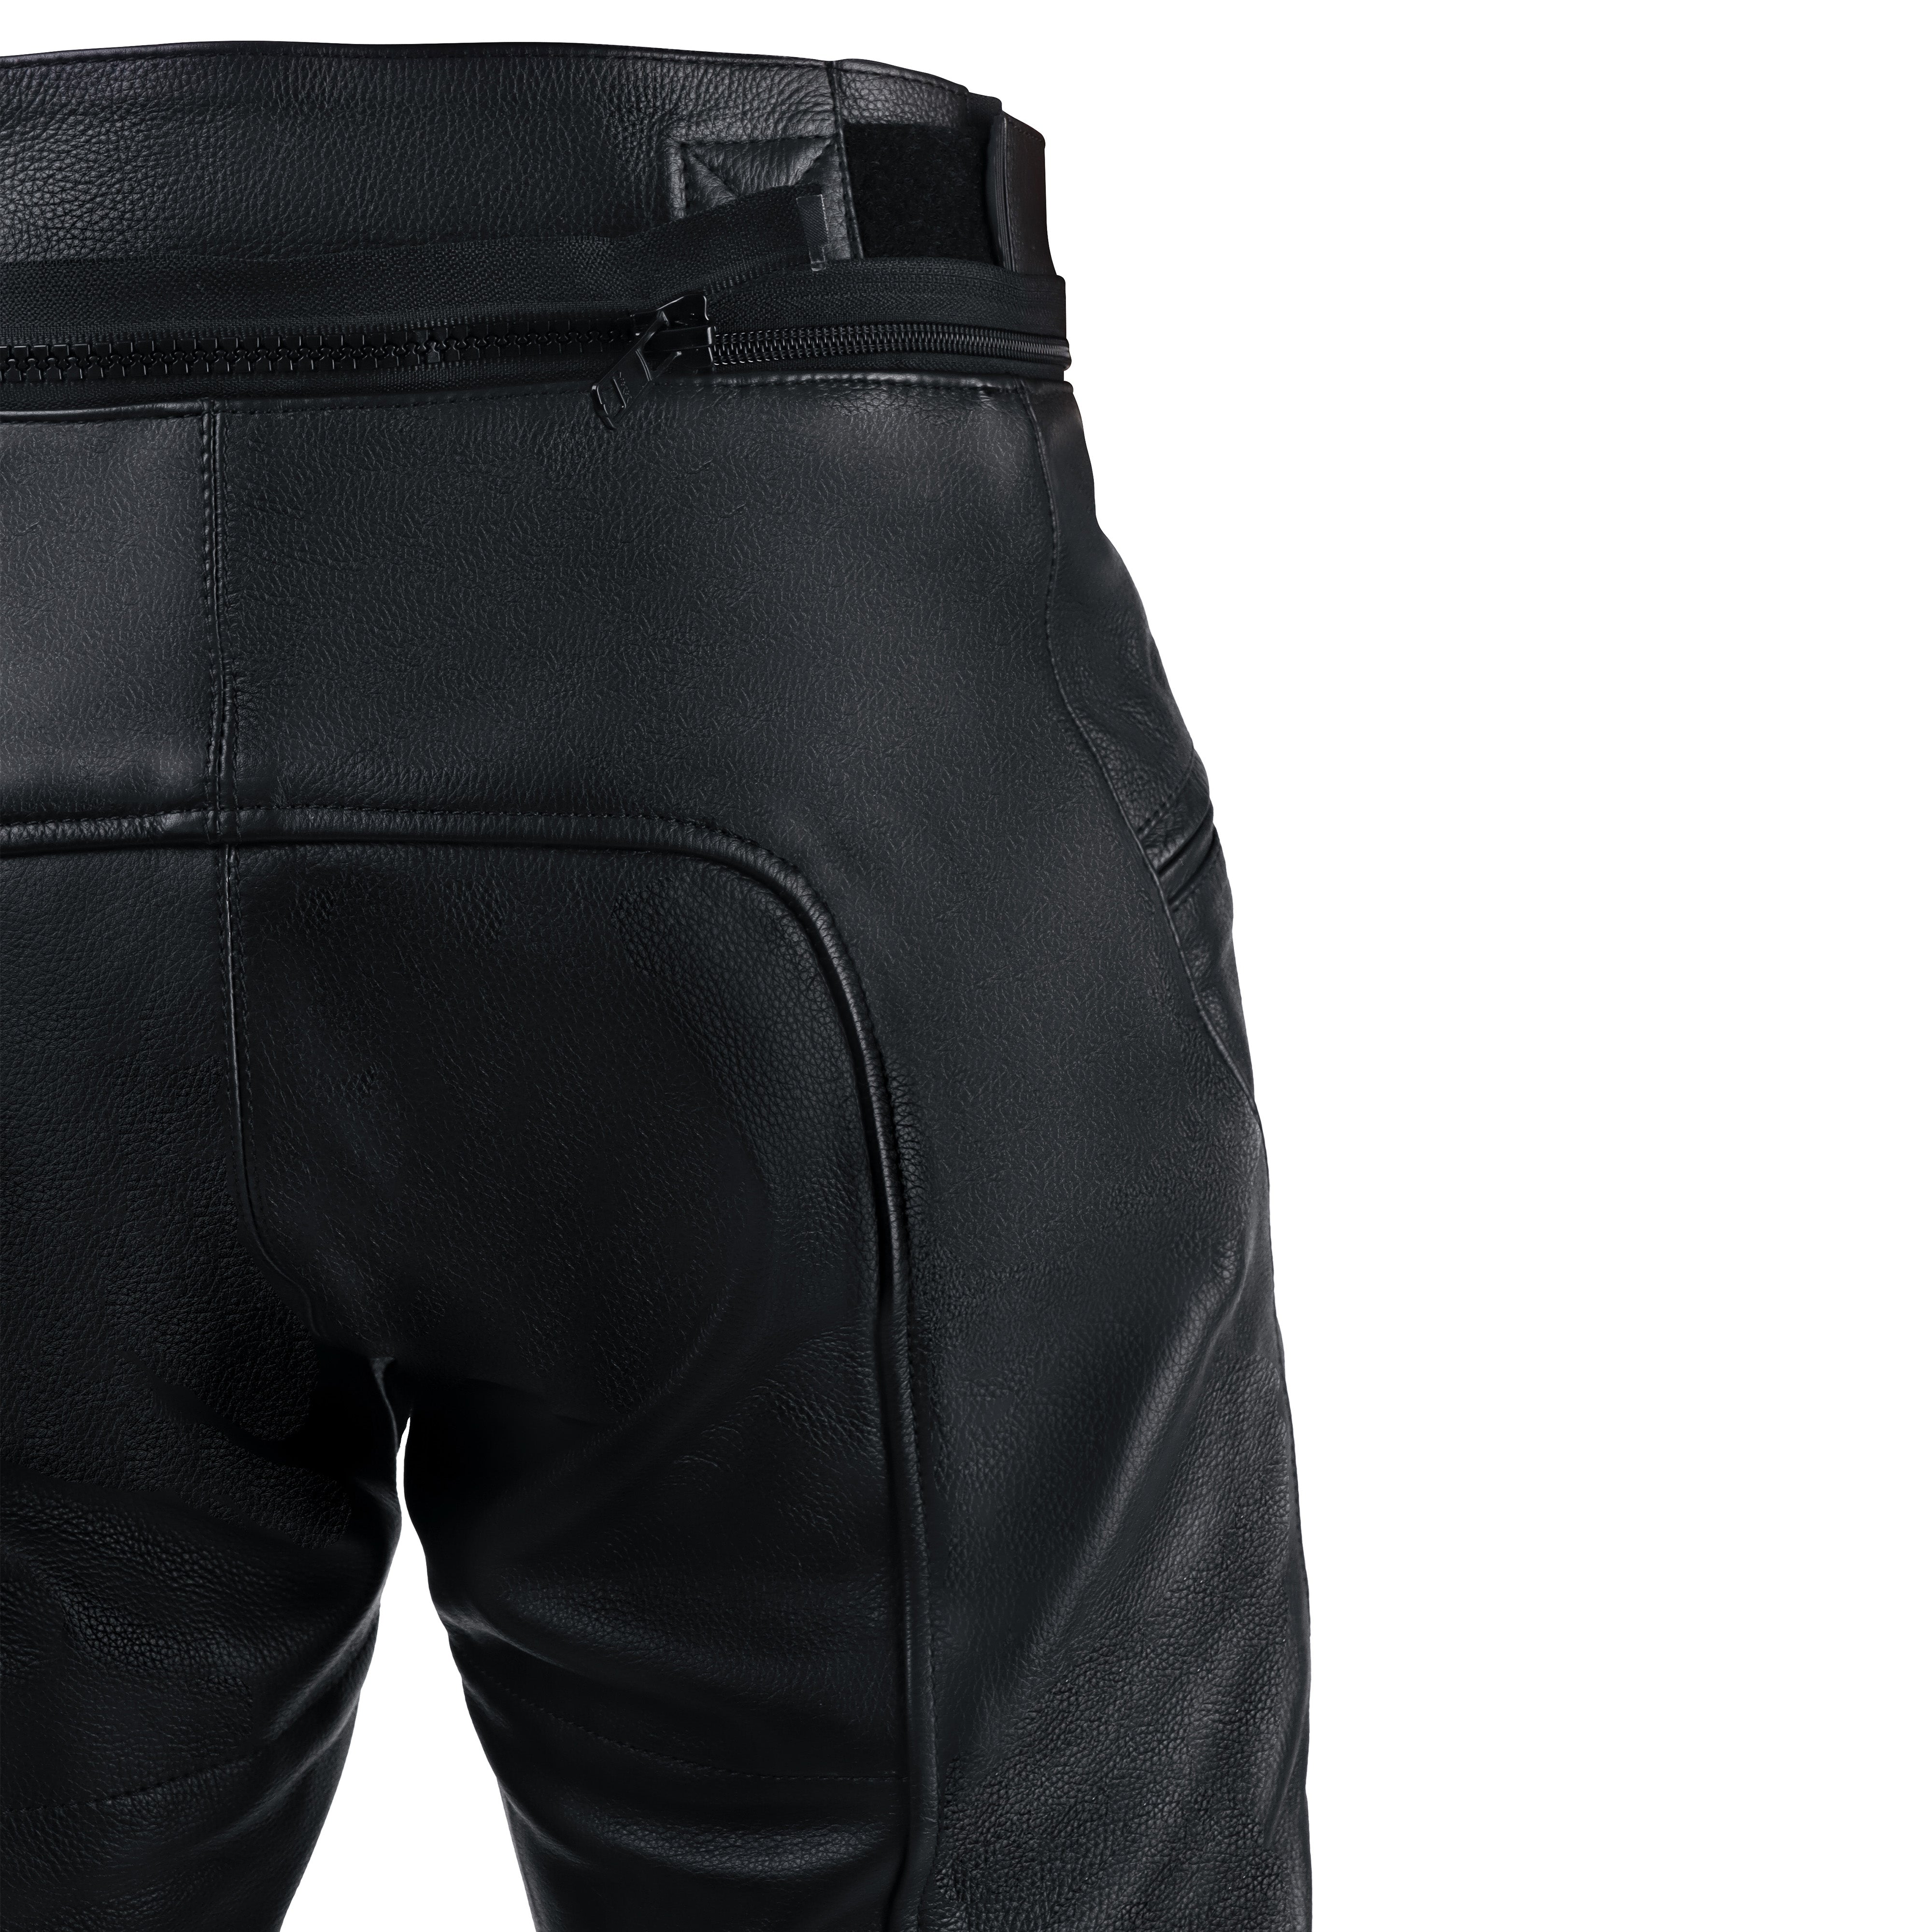 Motorcycle Black Leather Pants with white line - Maker of Jacket